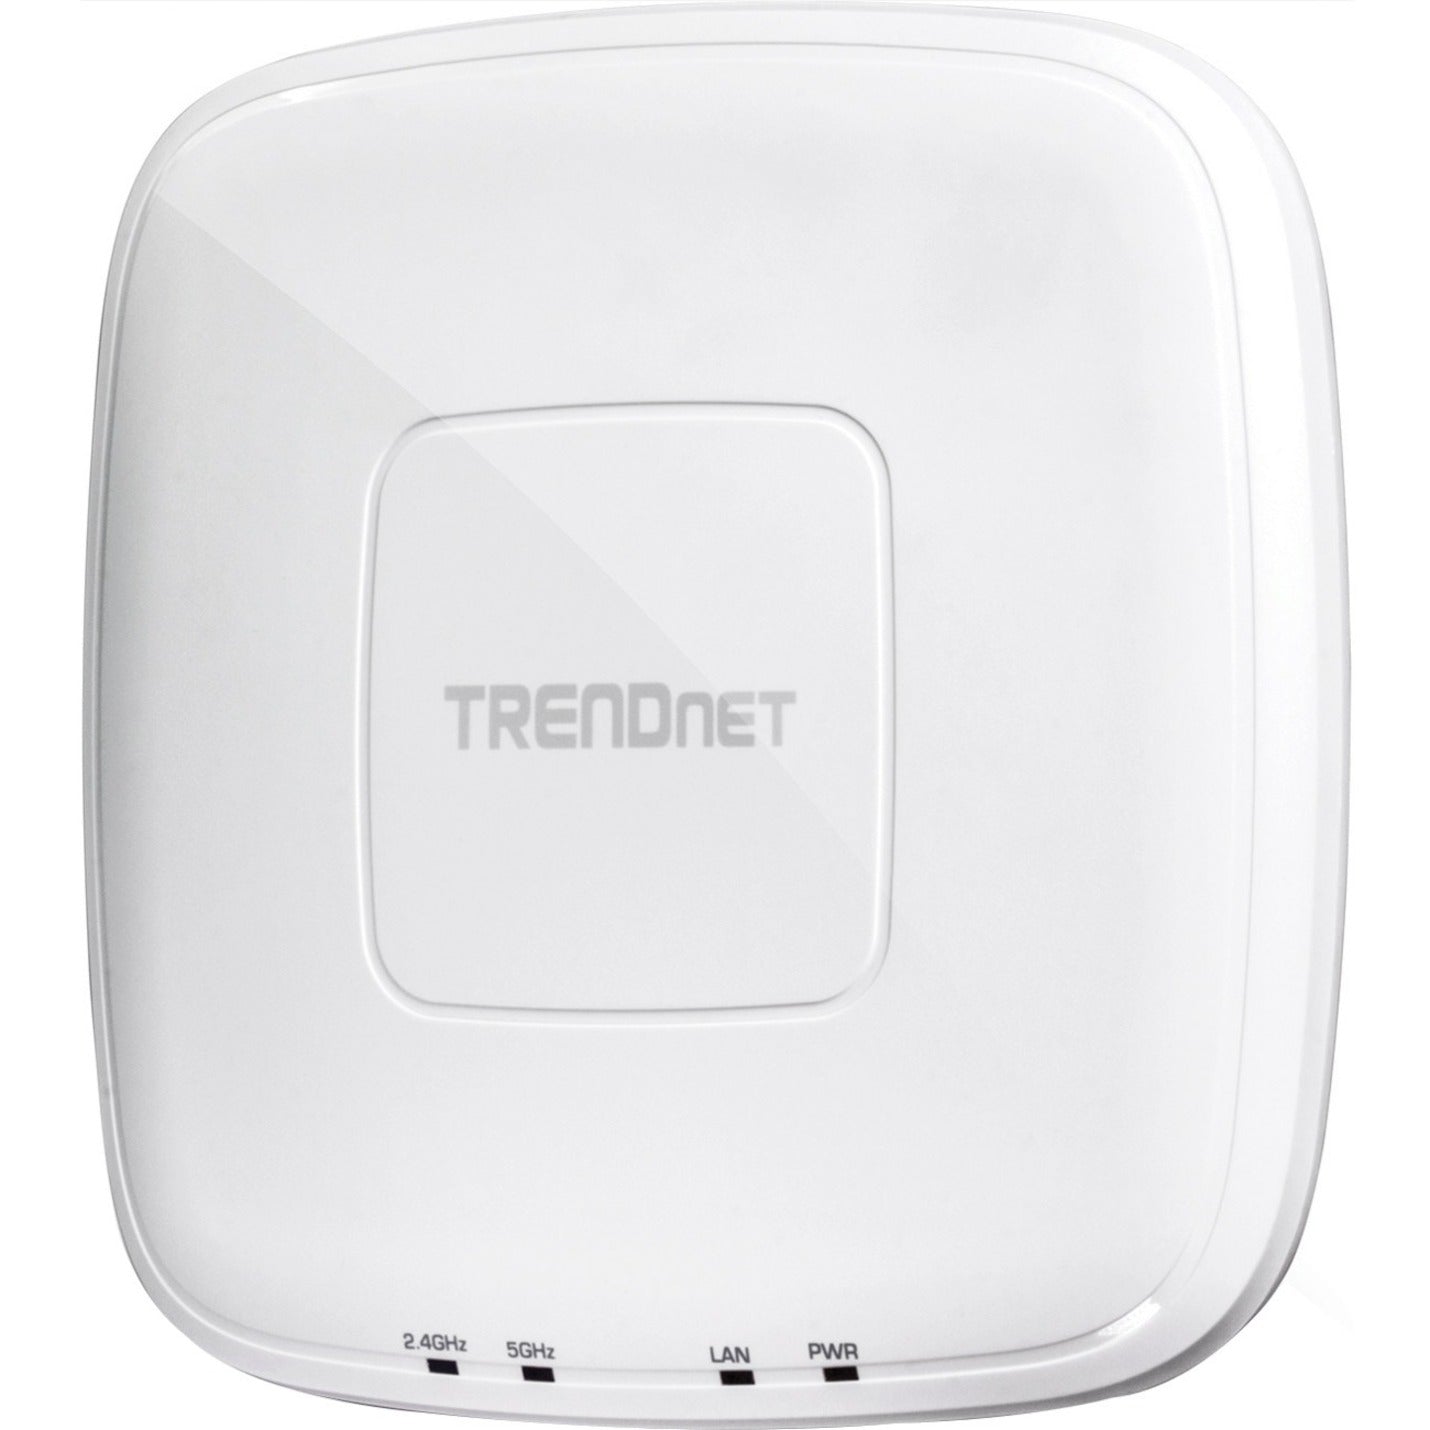 TRENDnet AC1200 Dual Band PoE Indoor Access Point MU-MIMO 867 Mbps WiFi AC 300 Mbps WiFi N Bands Client Bridge Repeater Modes Gigabit PoE LAN Port Captive Portal For Hotspot White TEW-821DAP